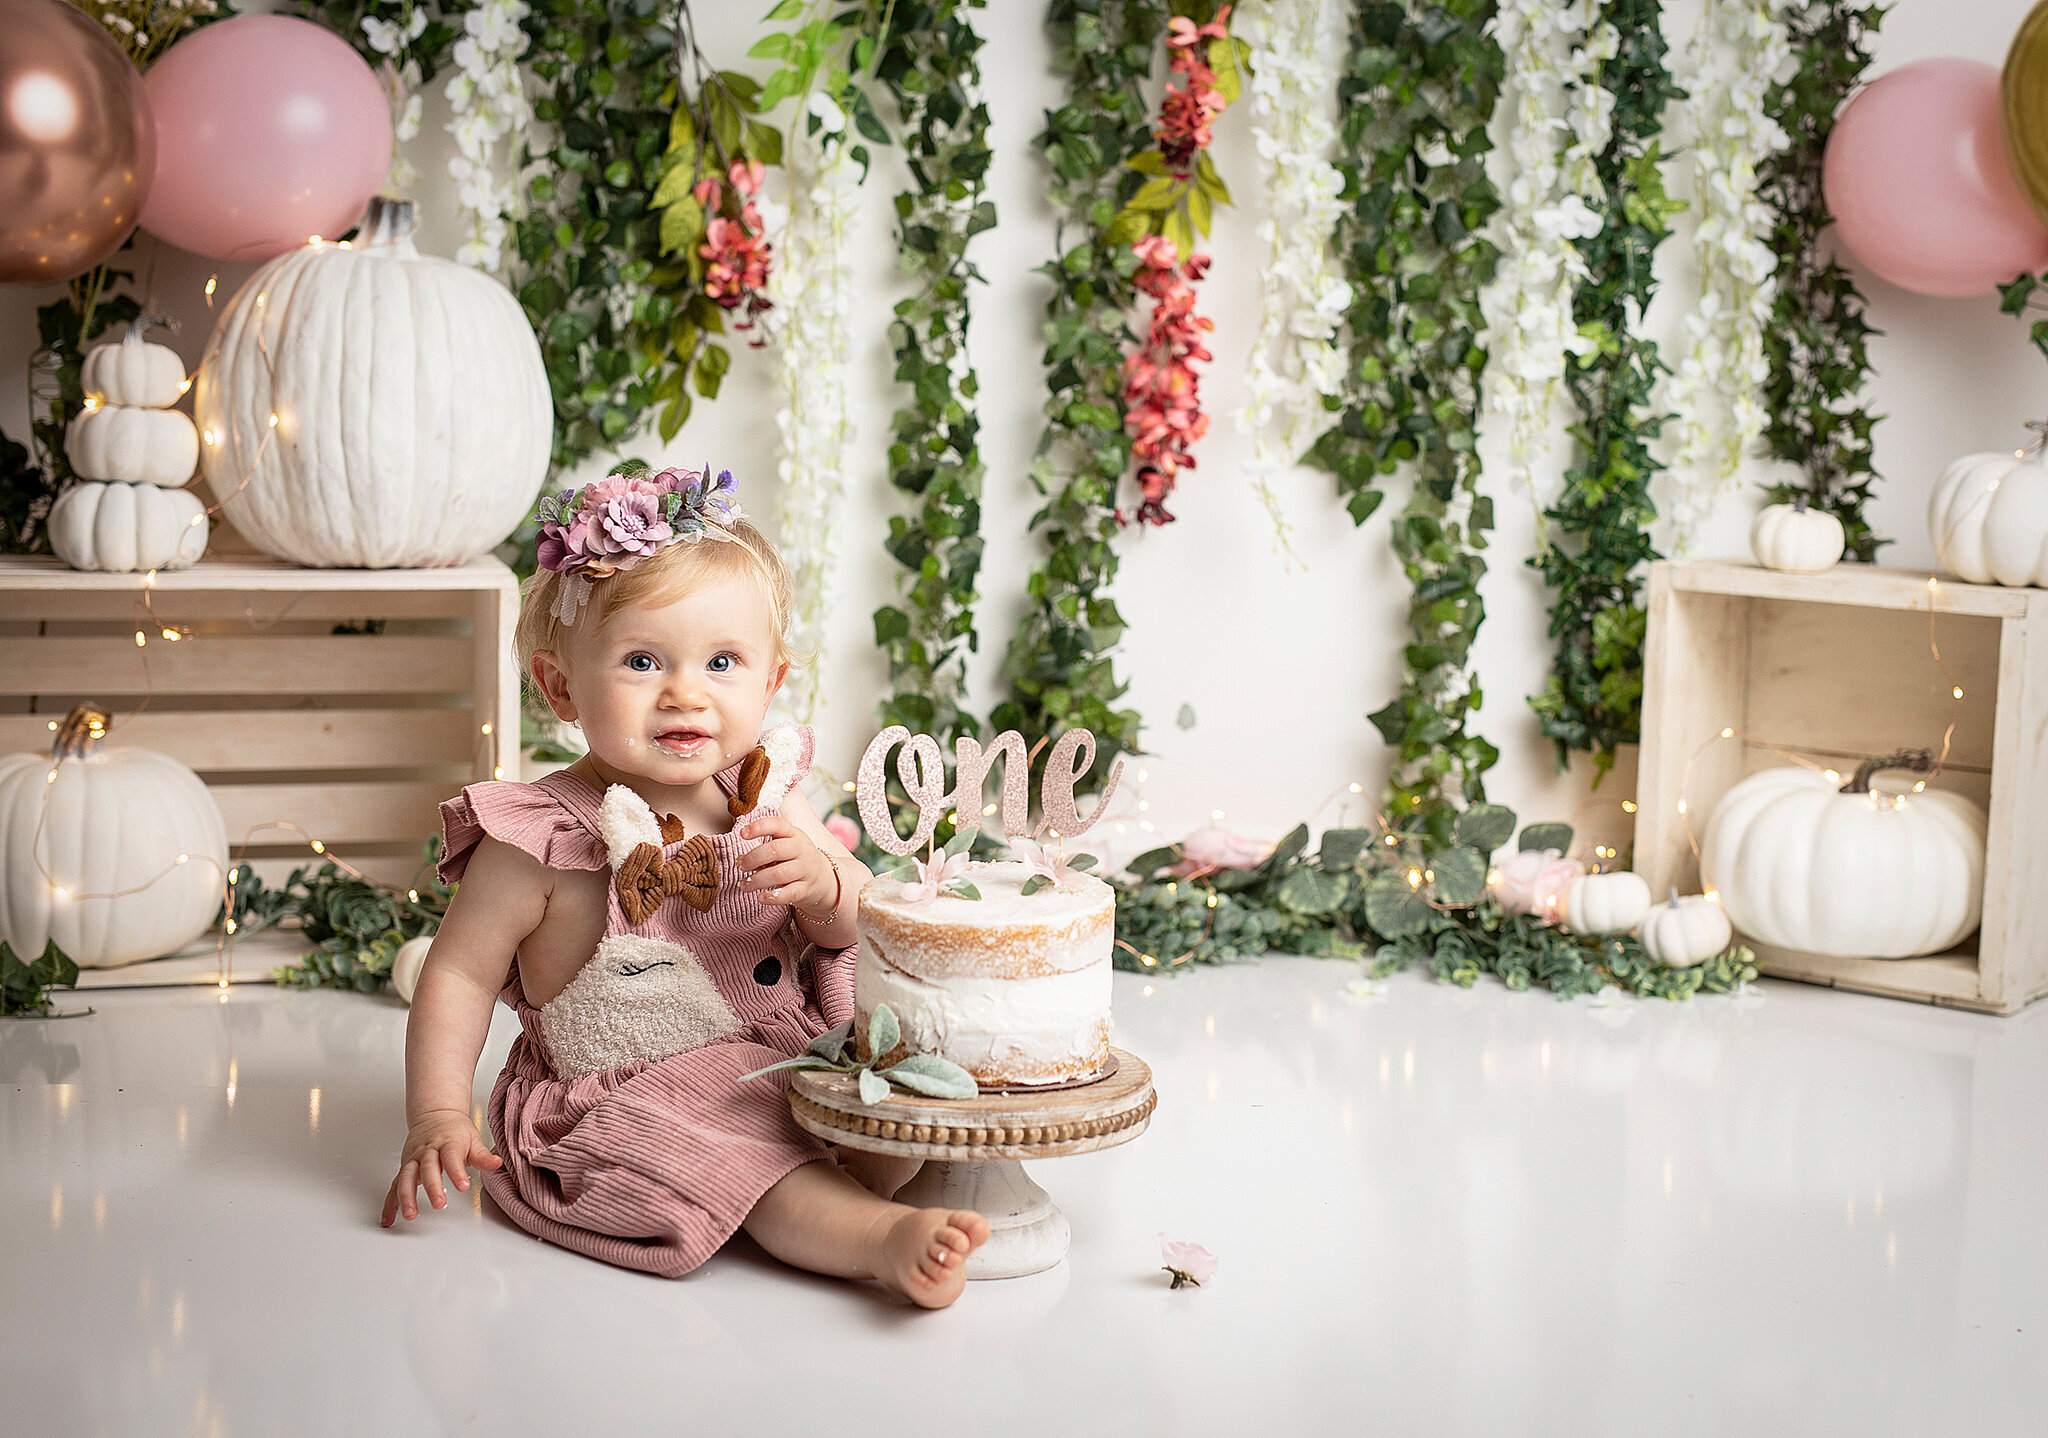 BAby smashing cake . wearing pink dress with flowers on the background, and pumpkins dotted as well